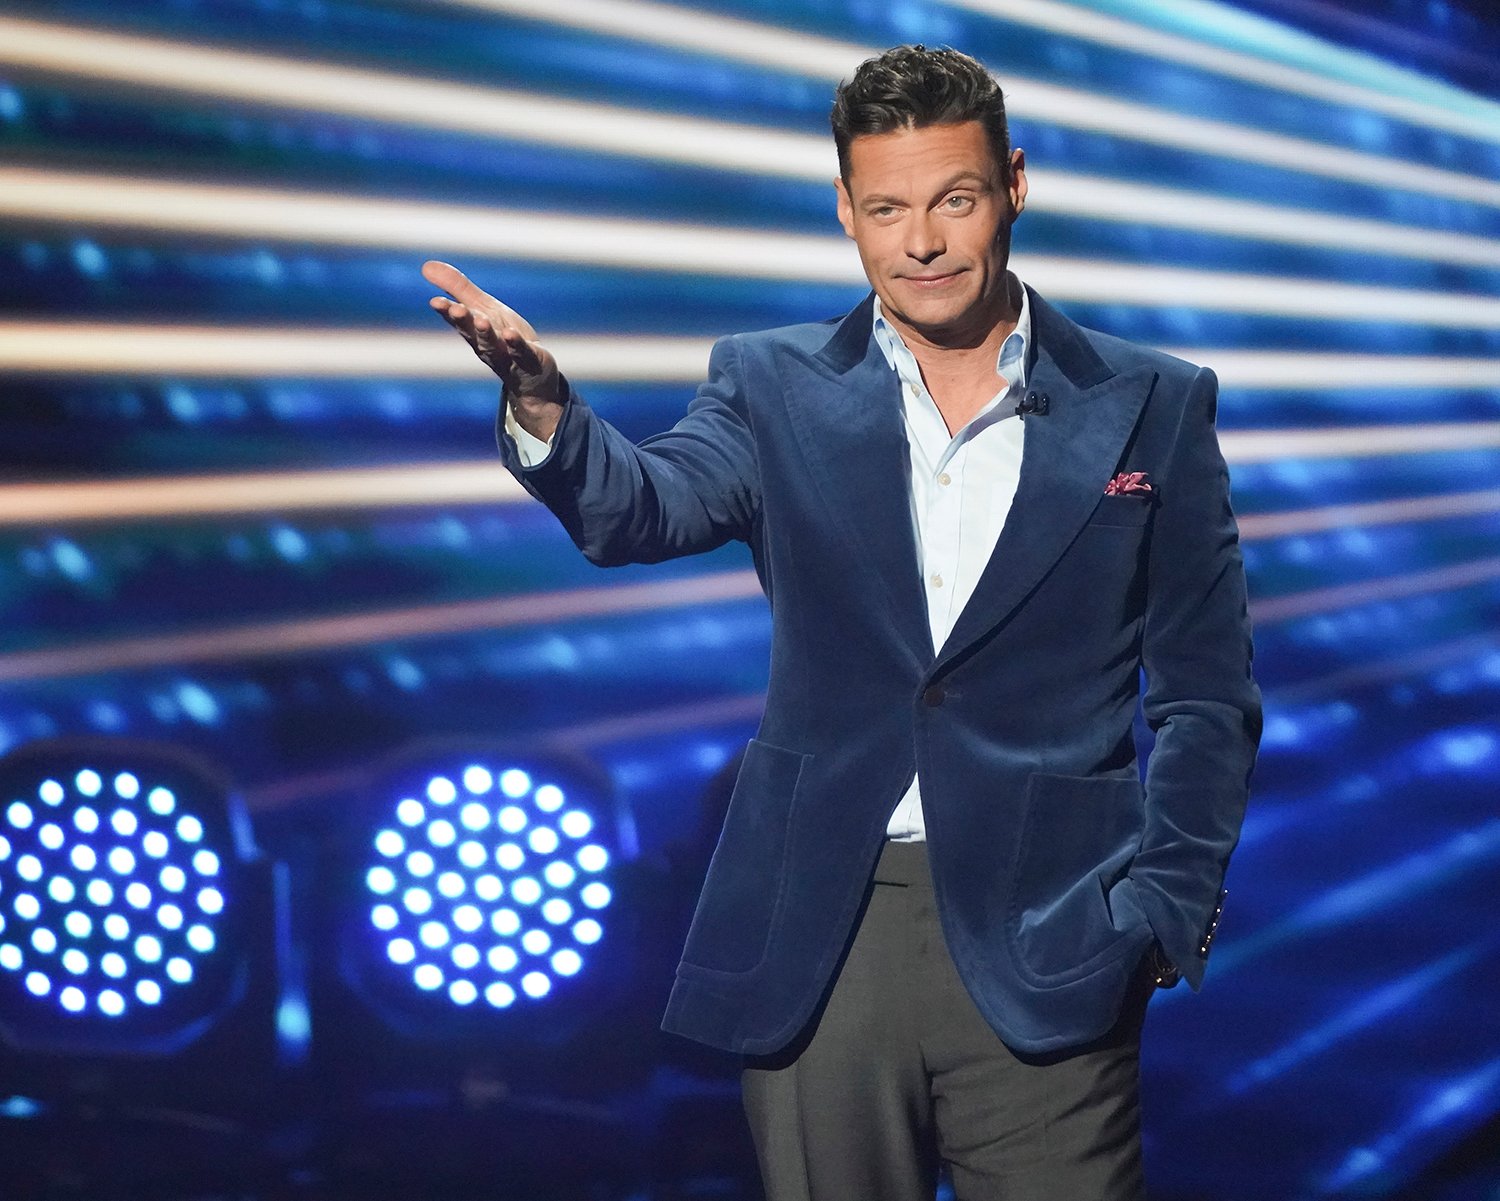 Ryan Seacrest hosts the American Idol 2022 finale, where he had to change his underwear.